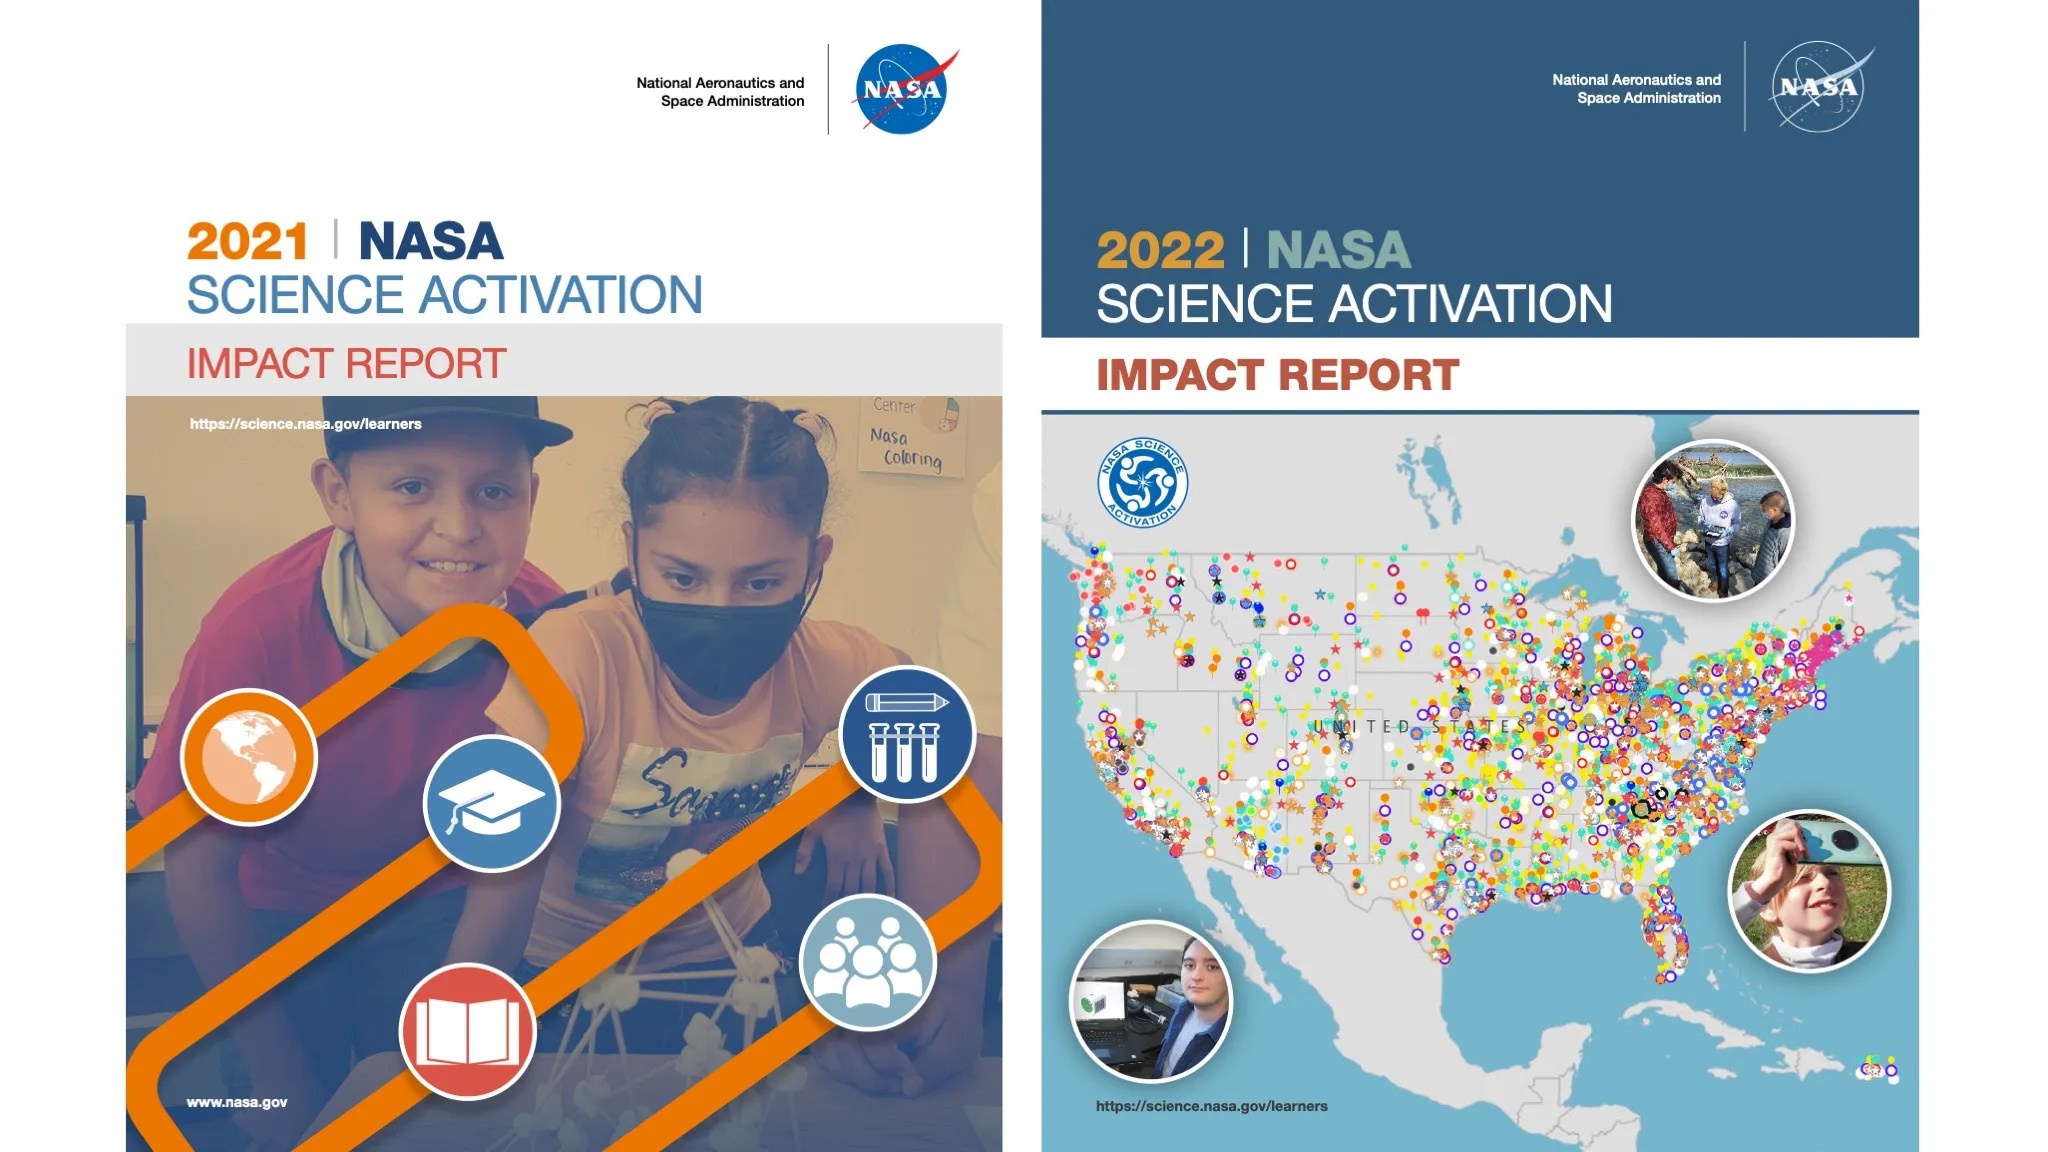 The covers of the 2021 and 2022 SciAct Impact Reports